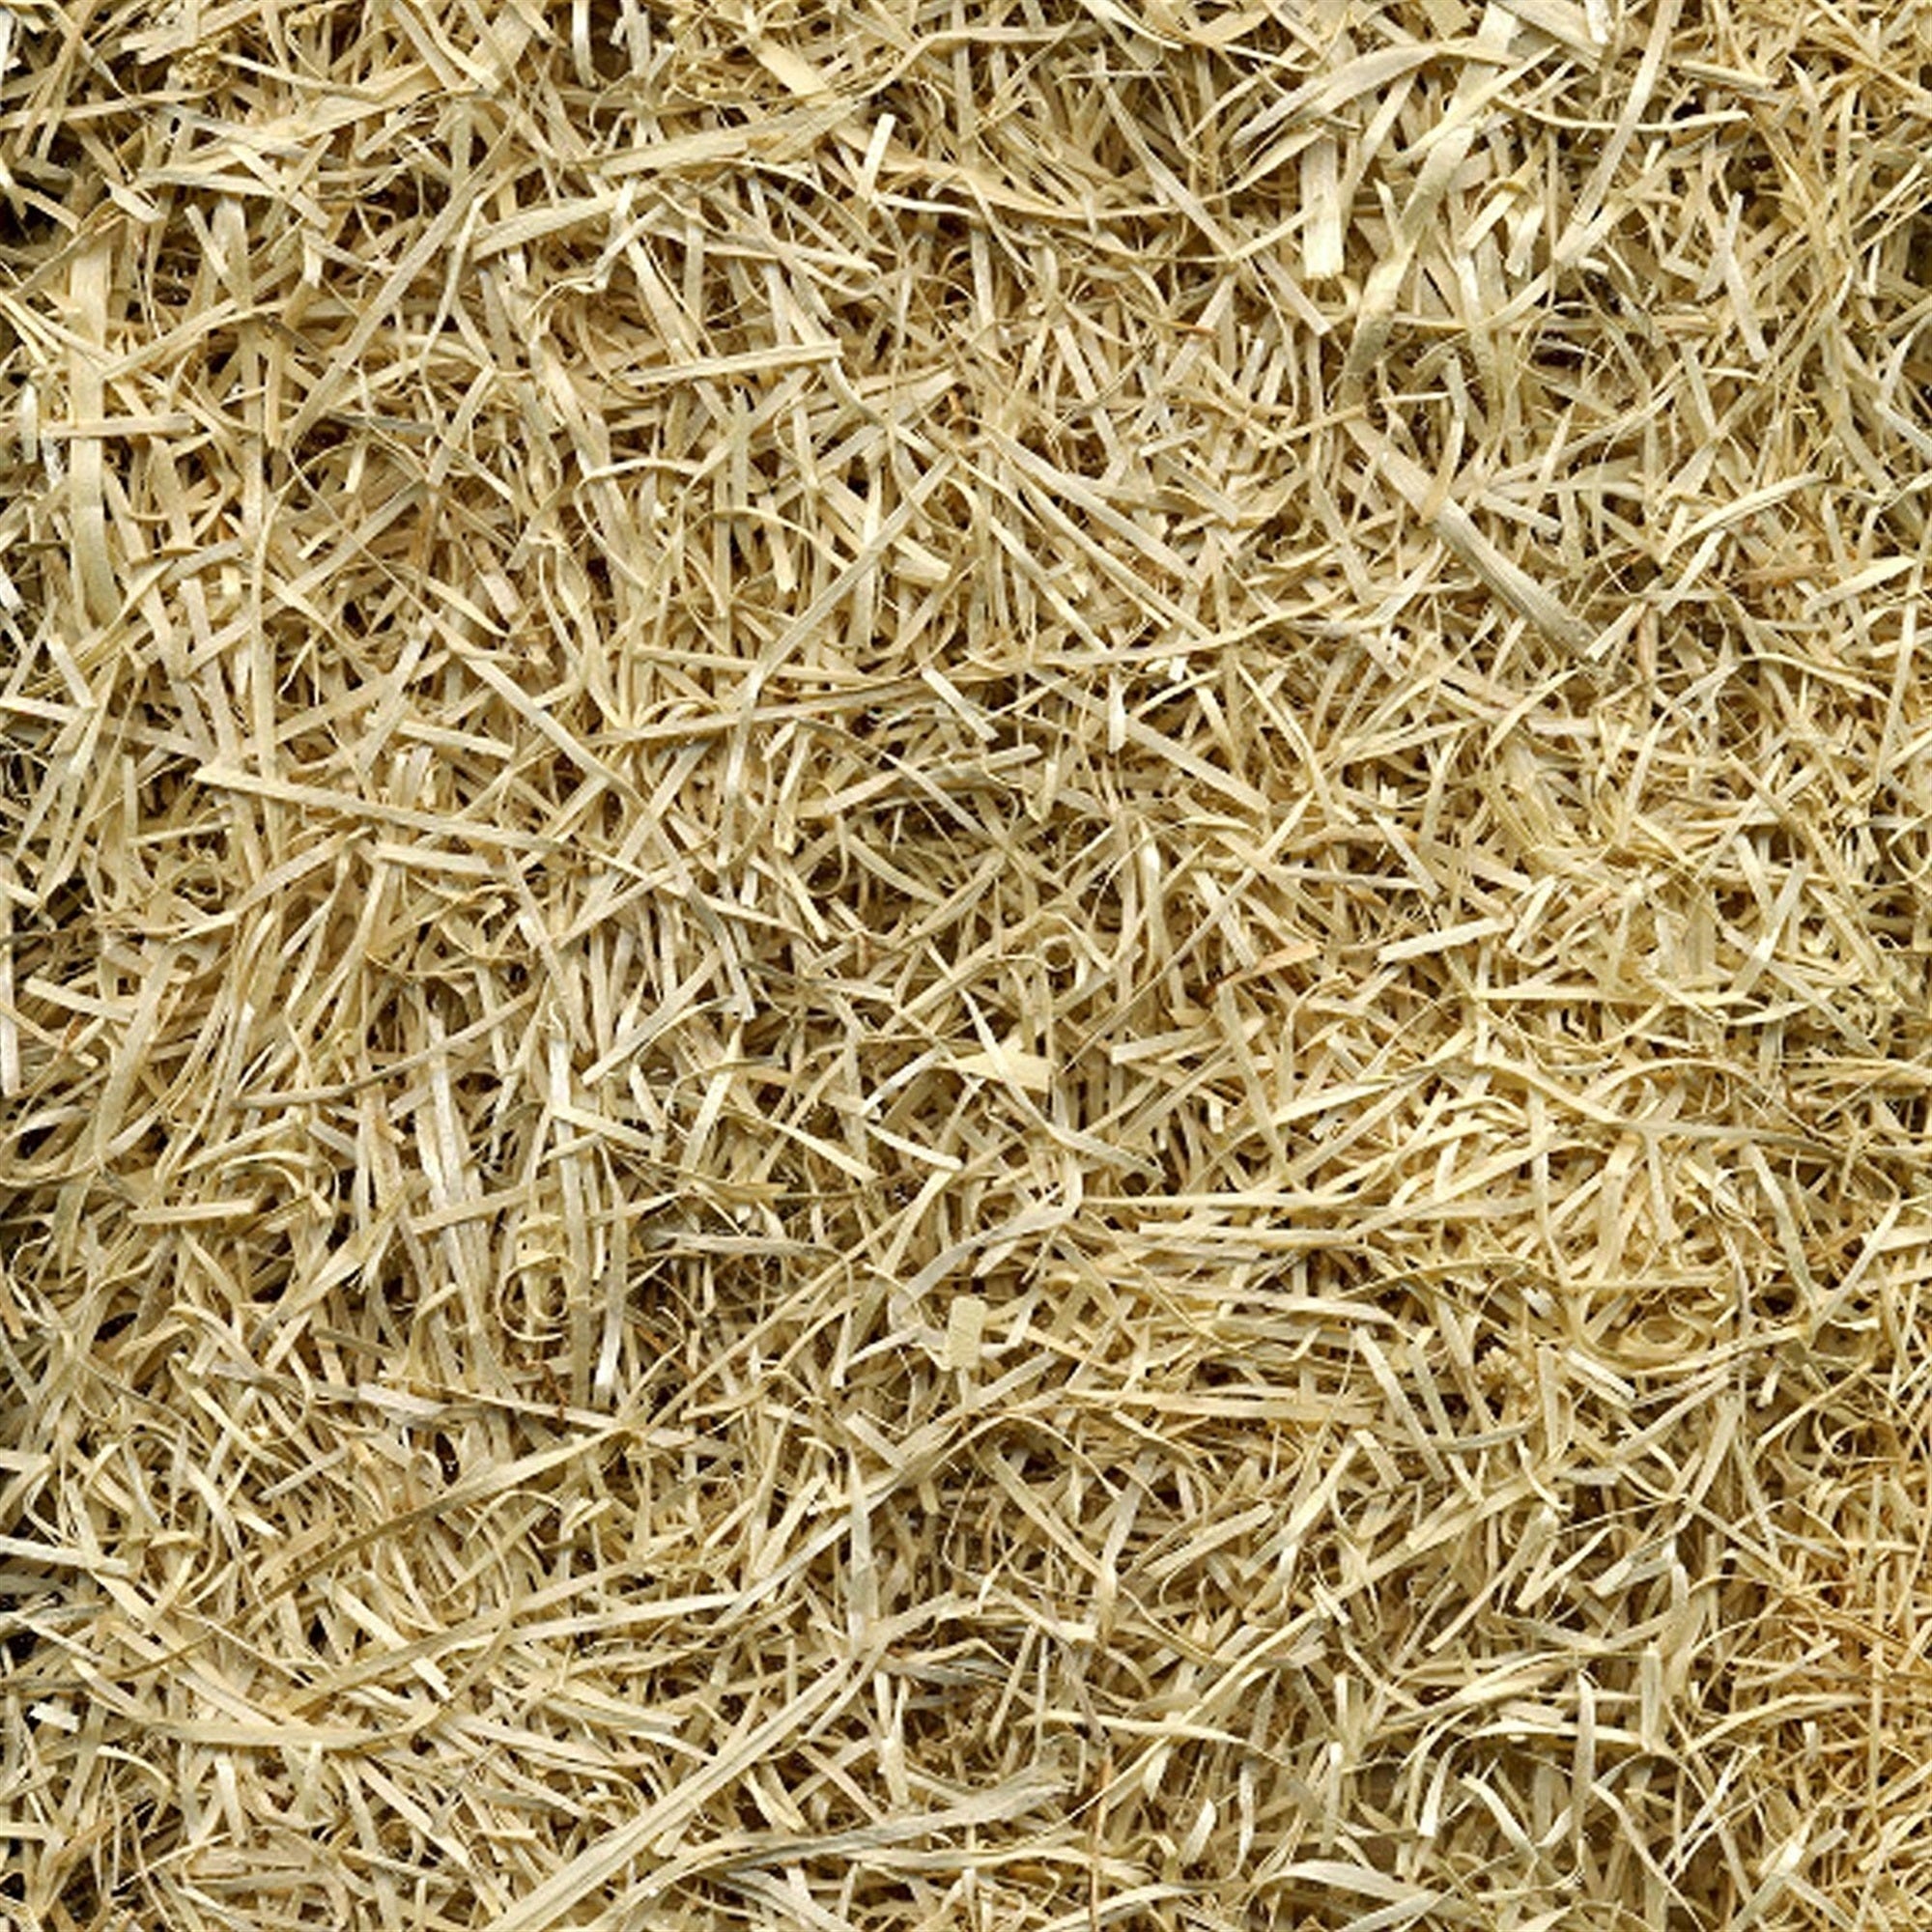 Rhino Seed & Landscaping Supply All-Purpose Straw Bale, 10 lb